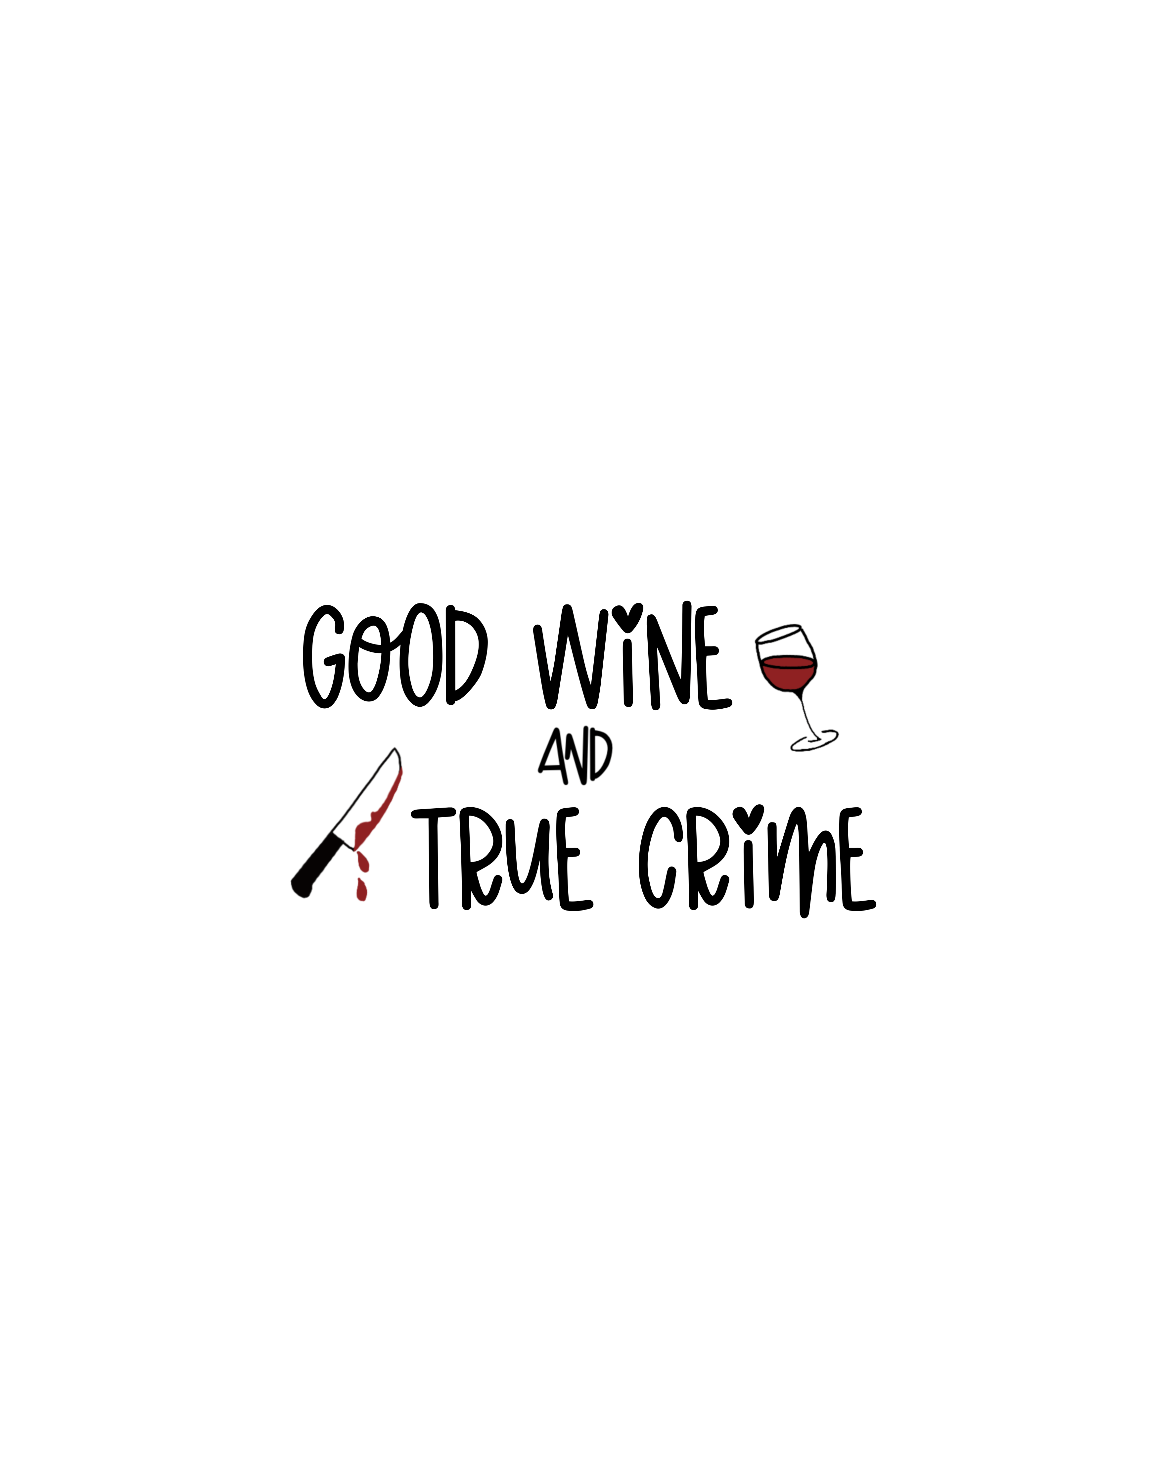 Good Wine and True Crime! This cotton t-shirt is perfect for a night of cuddling, sipping wine, and watching that true crime documentary.  This t-shirt is the perfect gift for the true crime junkie in your life!